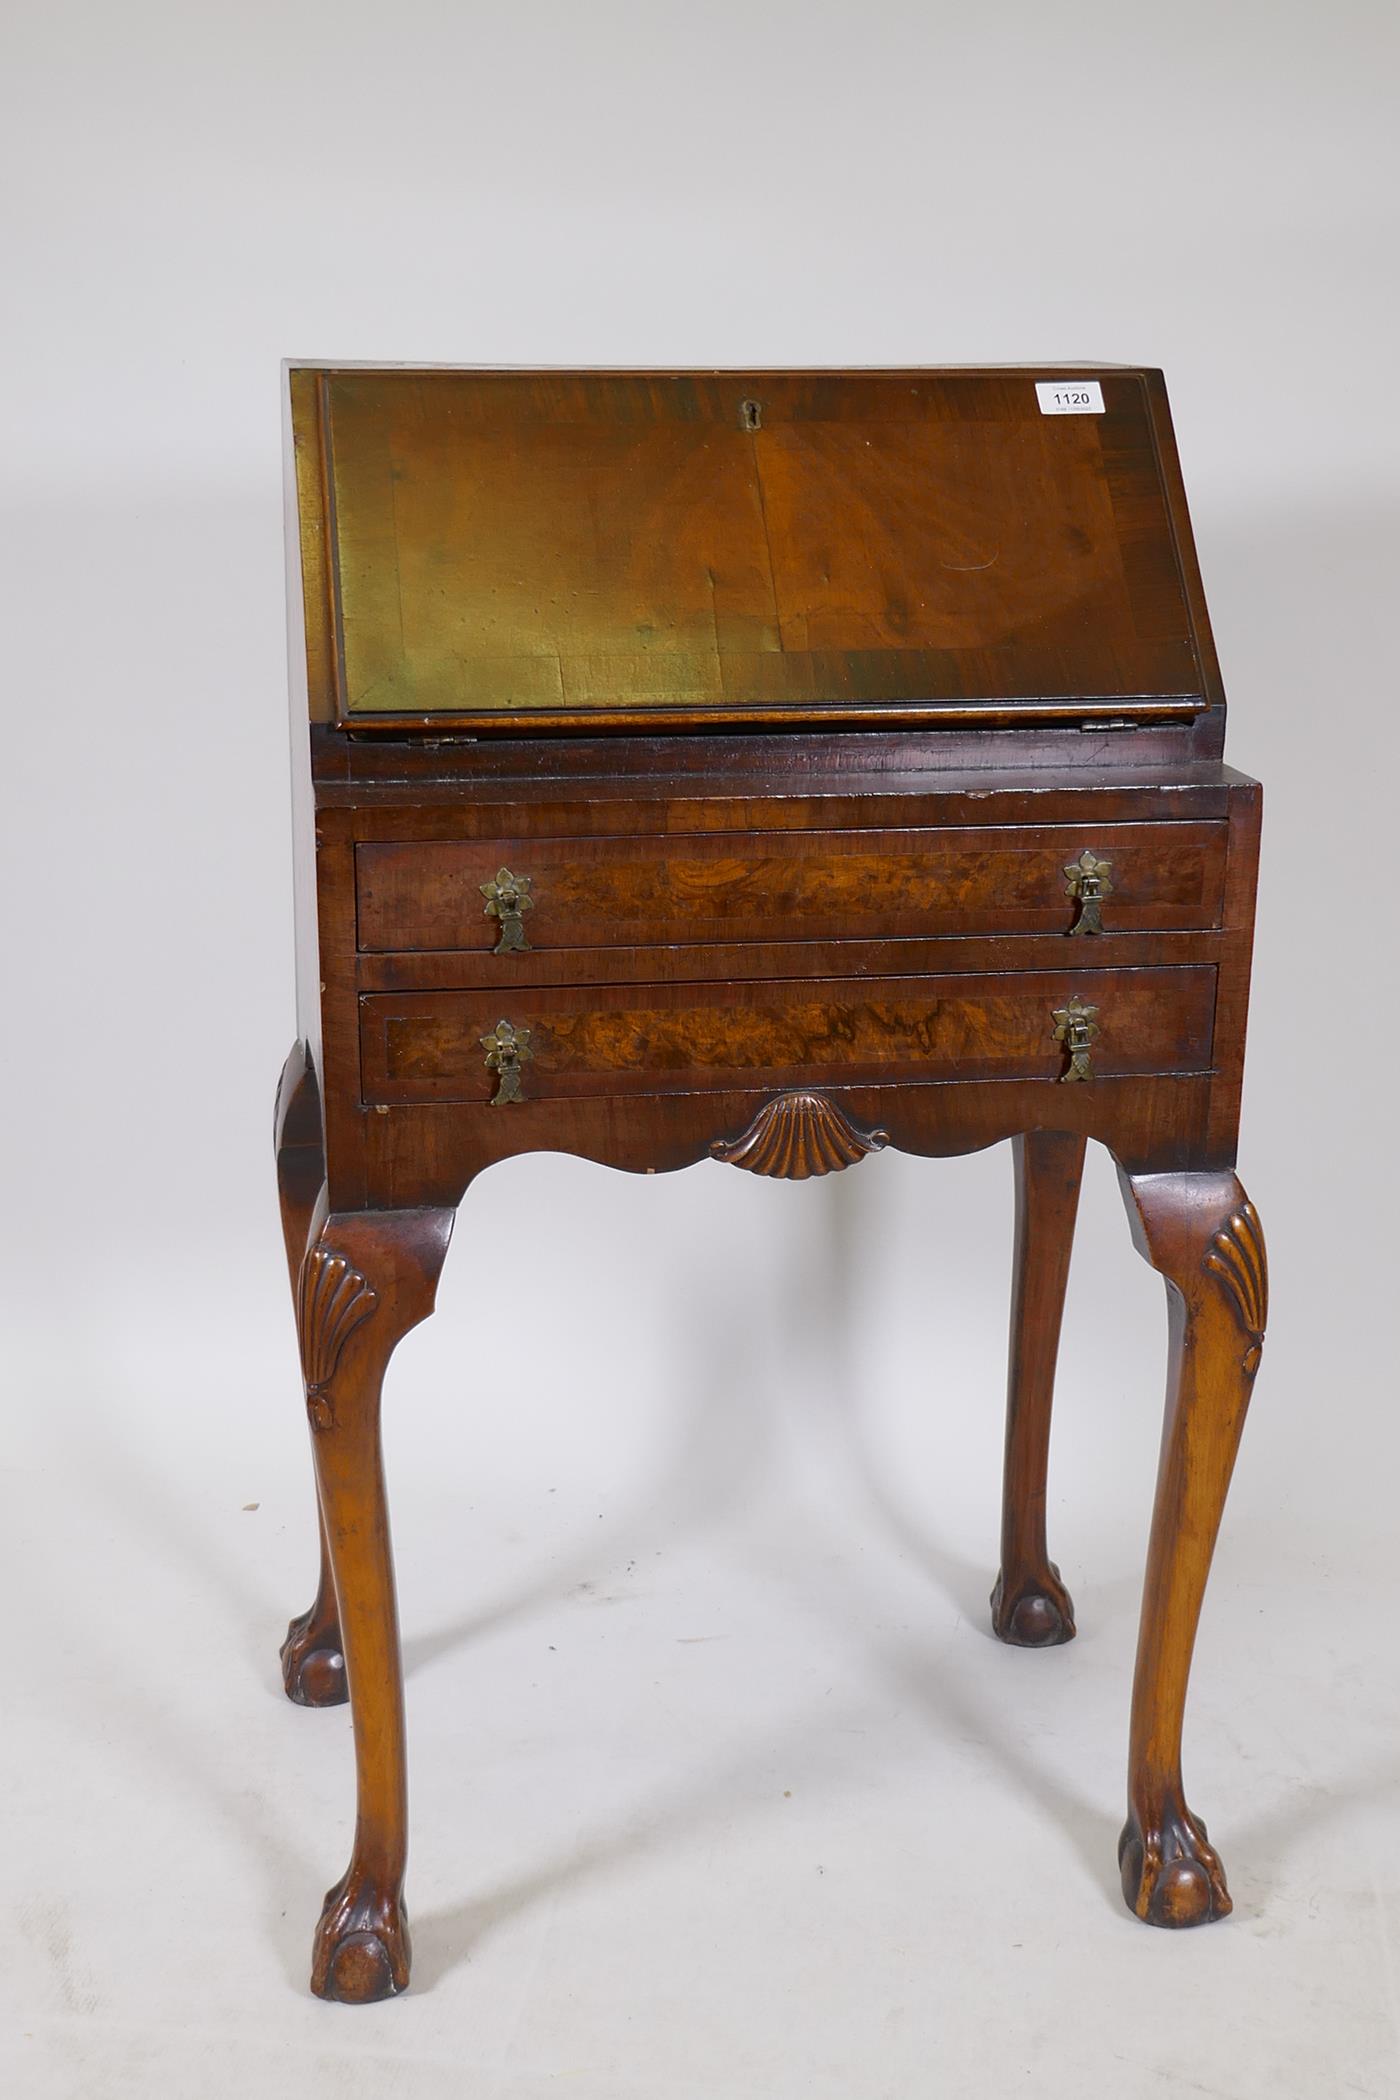 A 1920s Georgian style walnut fall front bureau with a fitted interior, two long drawers, cabriole